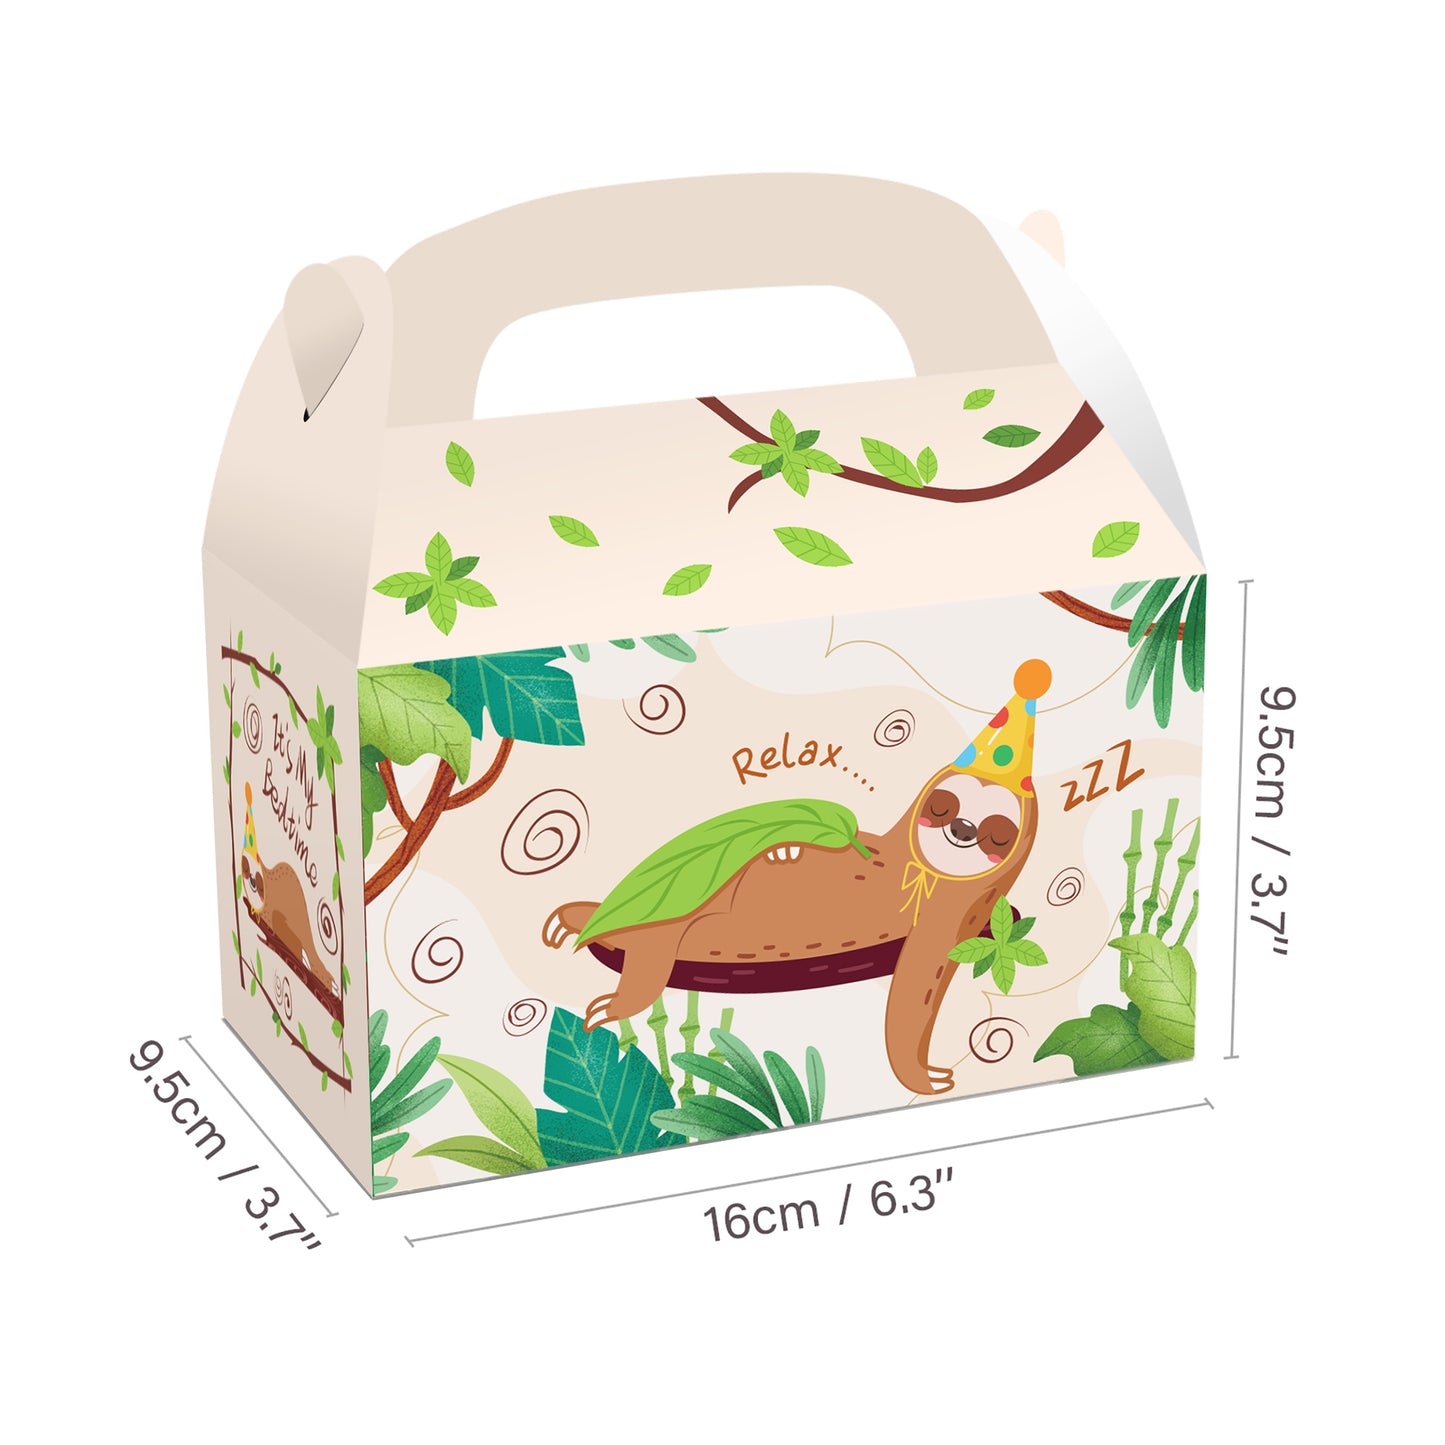 Hanging Sloth Paper Boxes, 12-pc